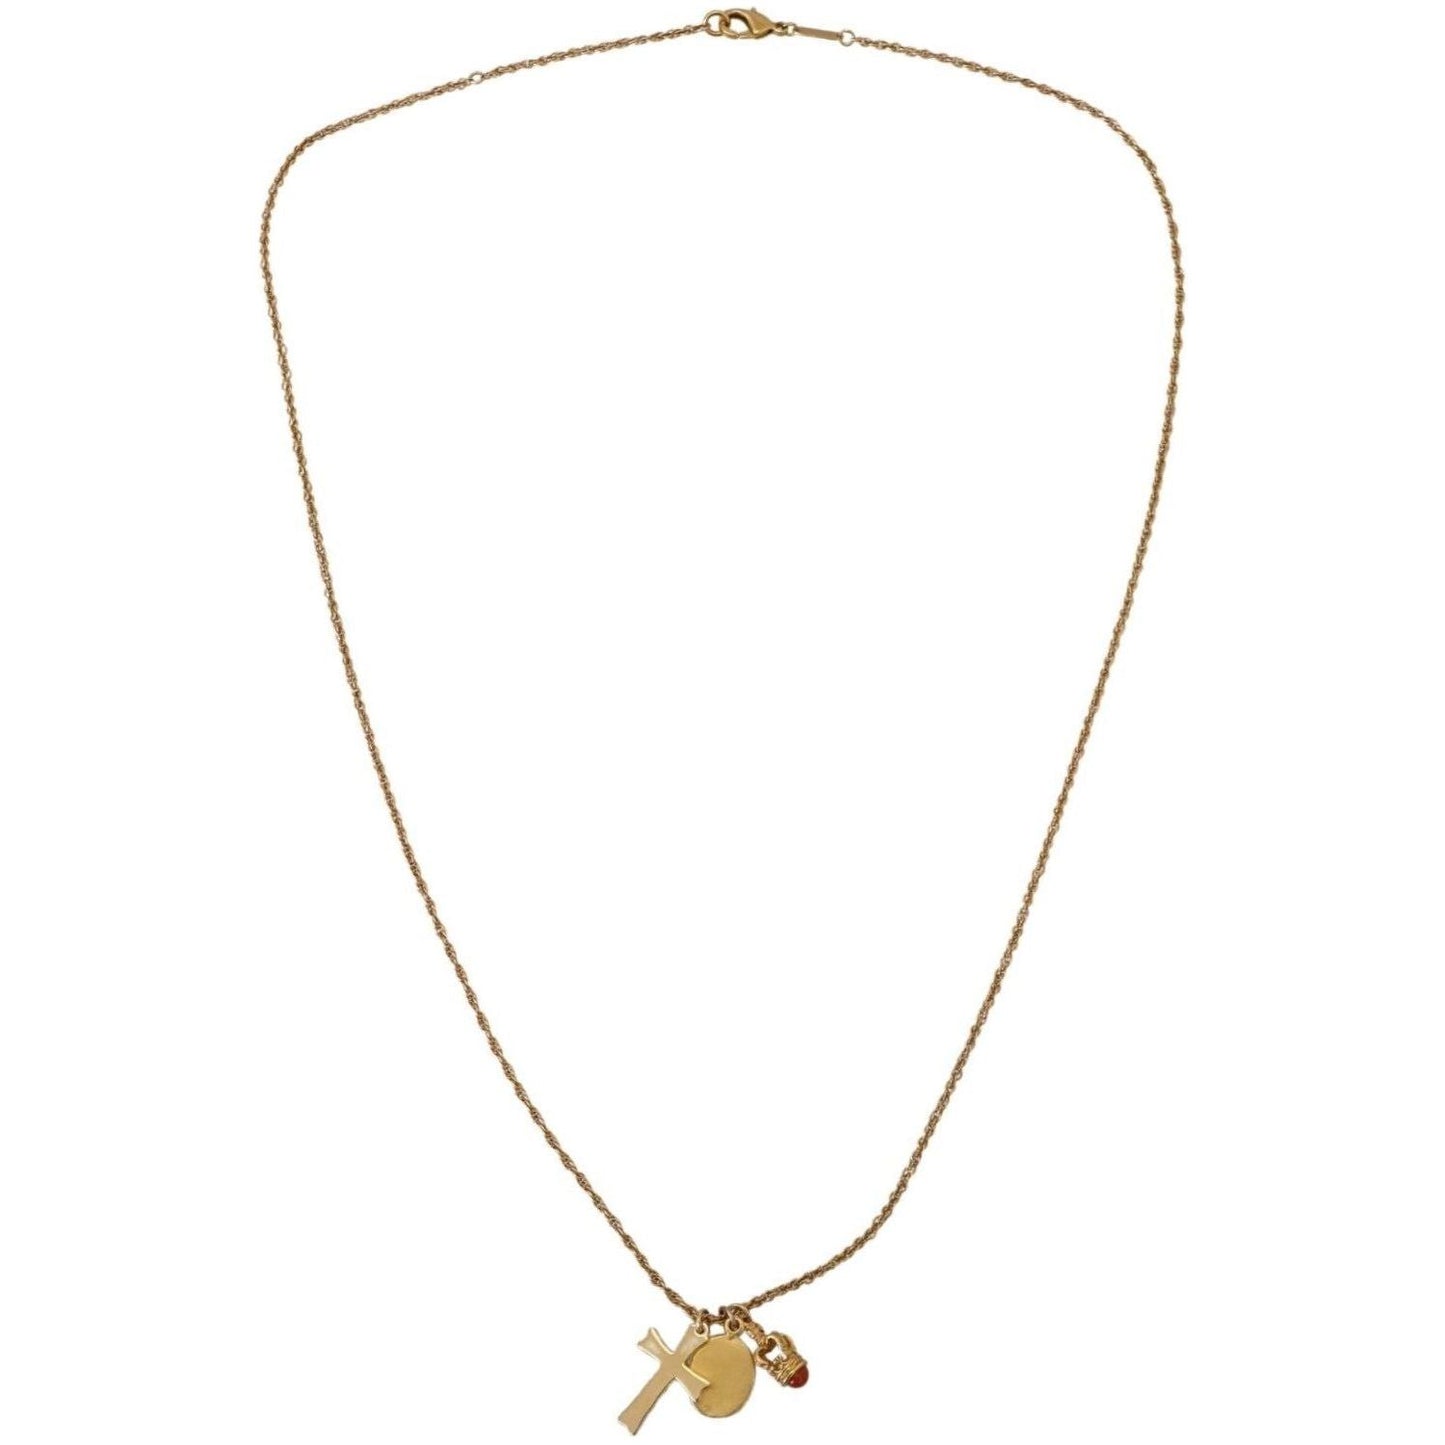 Dolce & Gabbana Elegant Gold Tone Charm Necklace with Cross Pendant gold-brass-chain-religious-cross-pendant-charm-necklace WOMAN NECKLACE IMG_4230-f3a1f73c-9e0.jpg